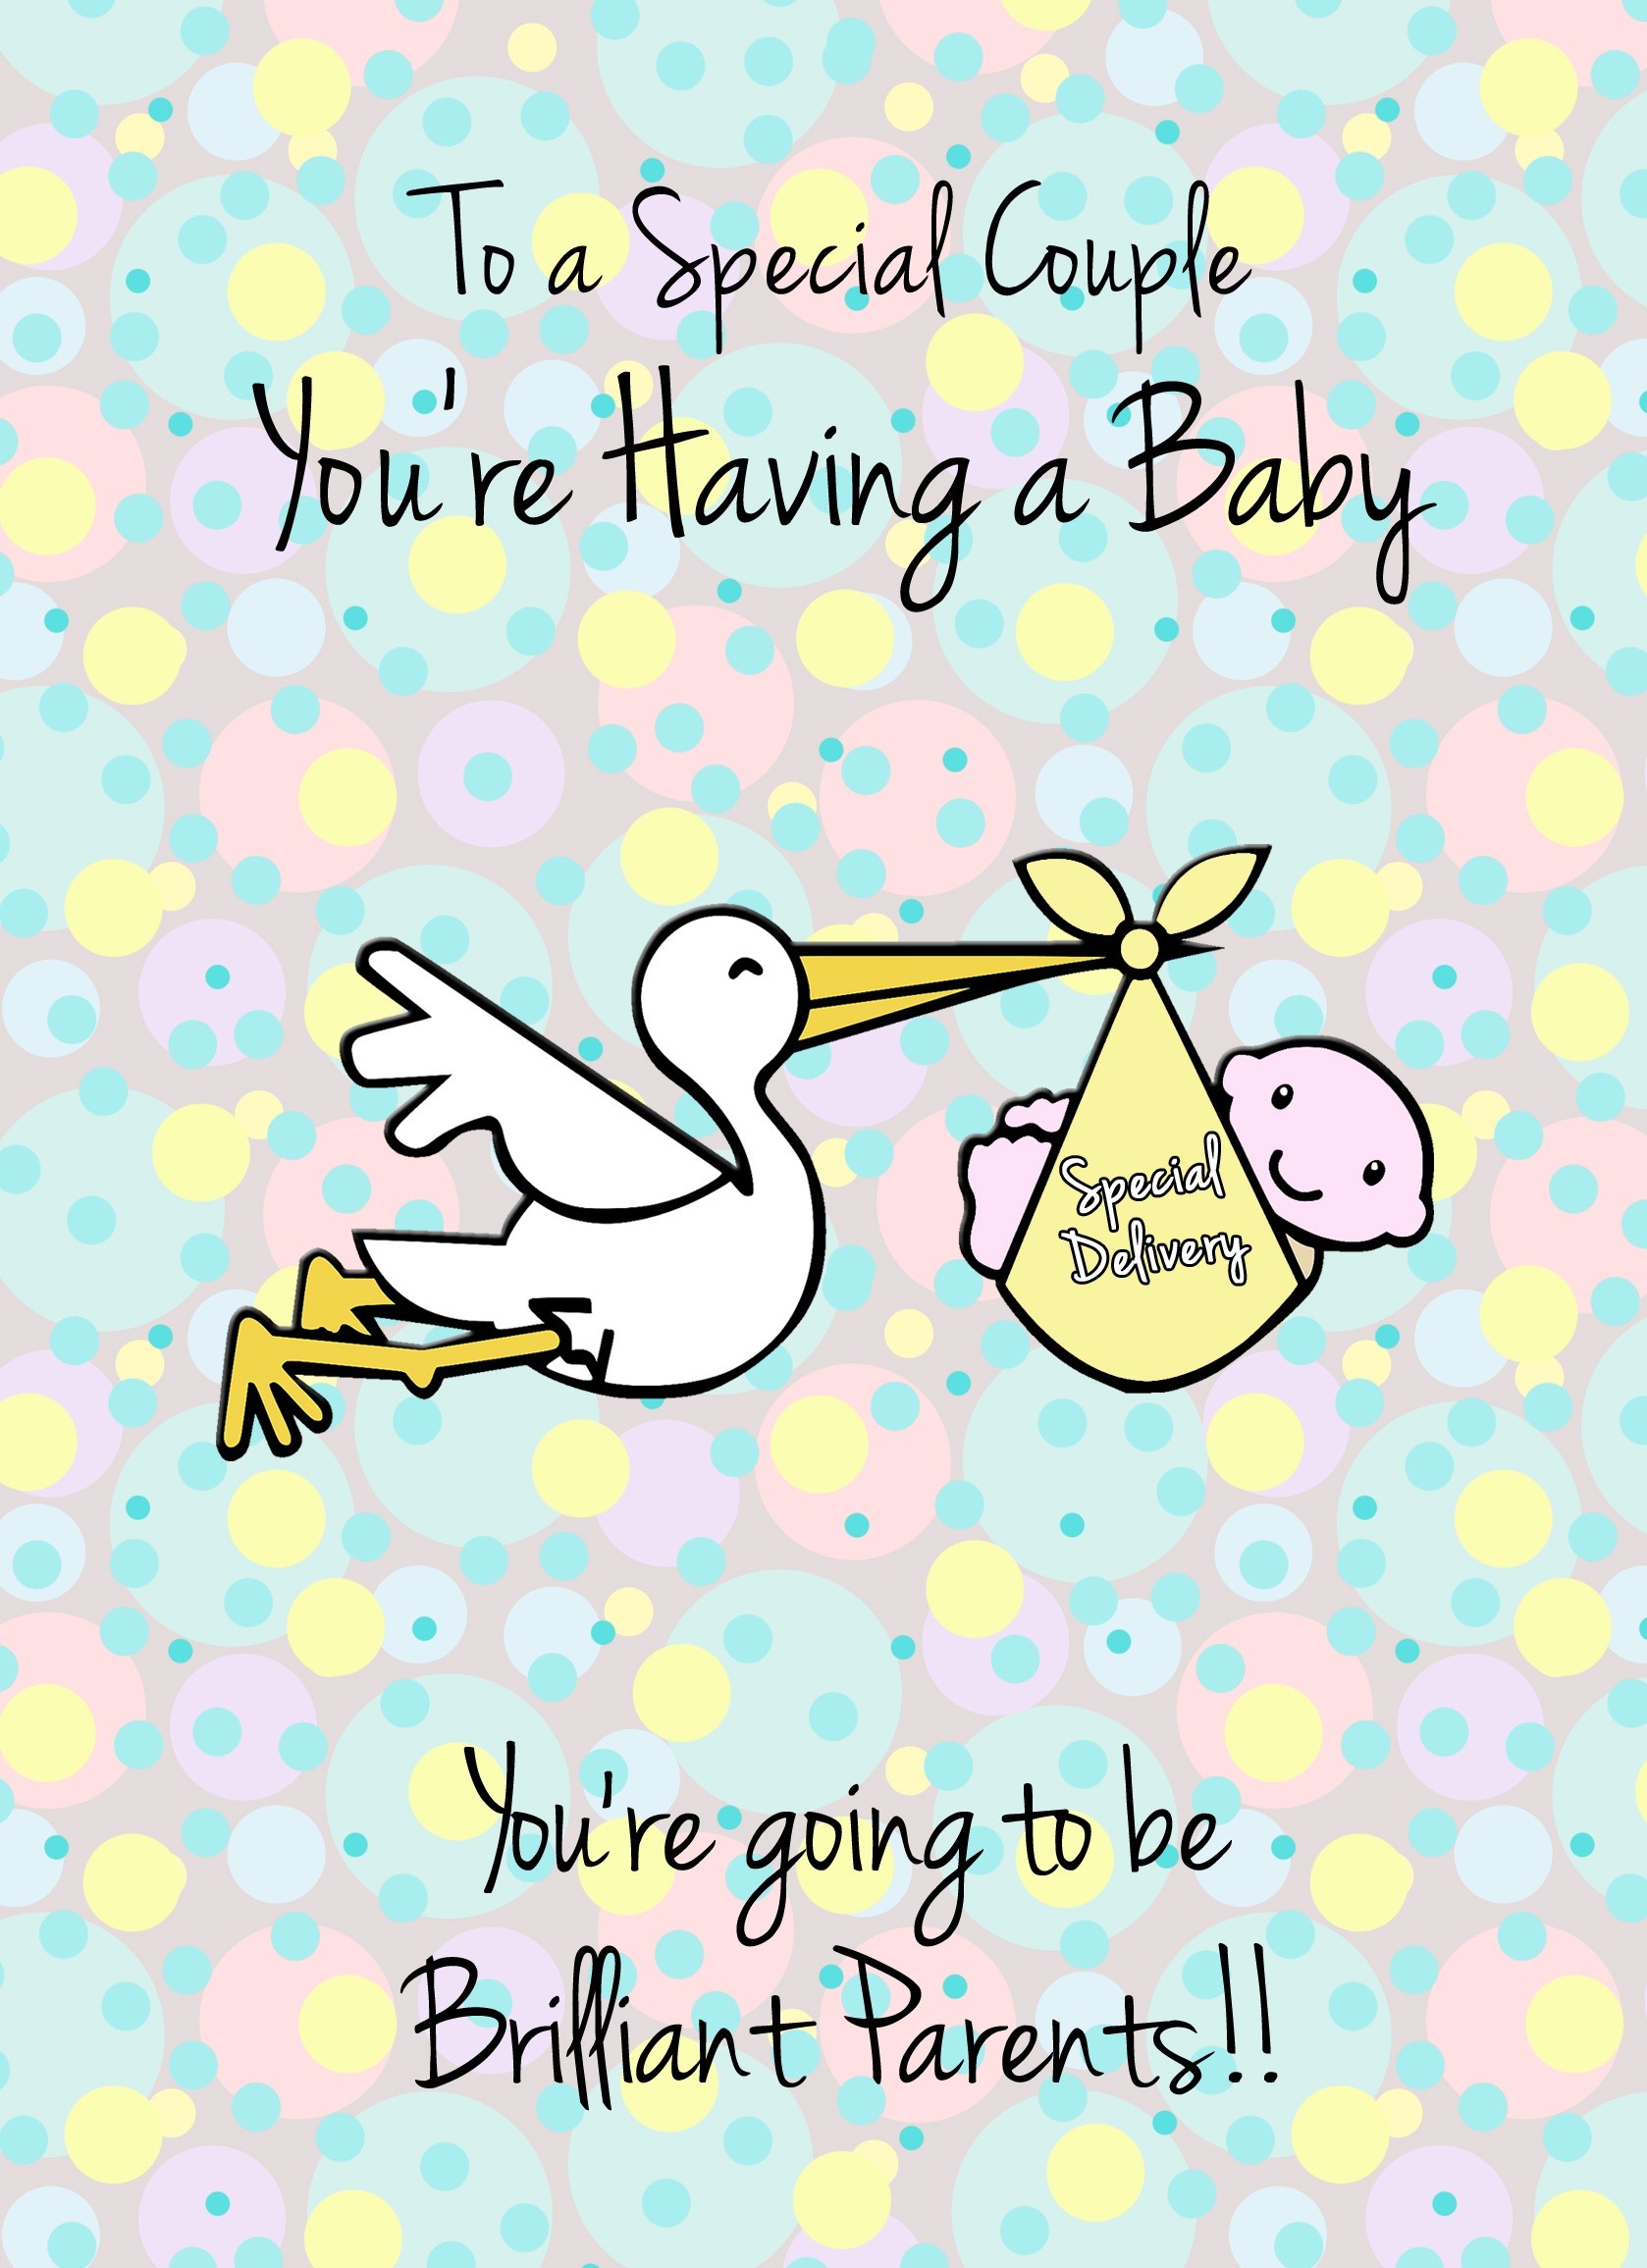 You're Having a Baby Pregnancy Card (Stork)